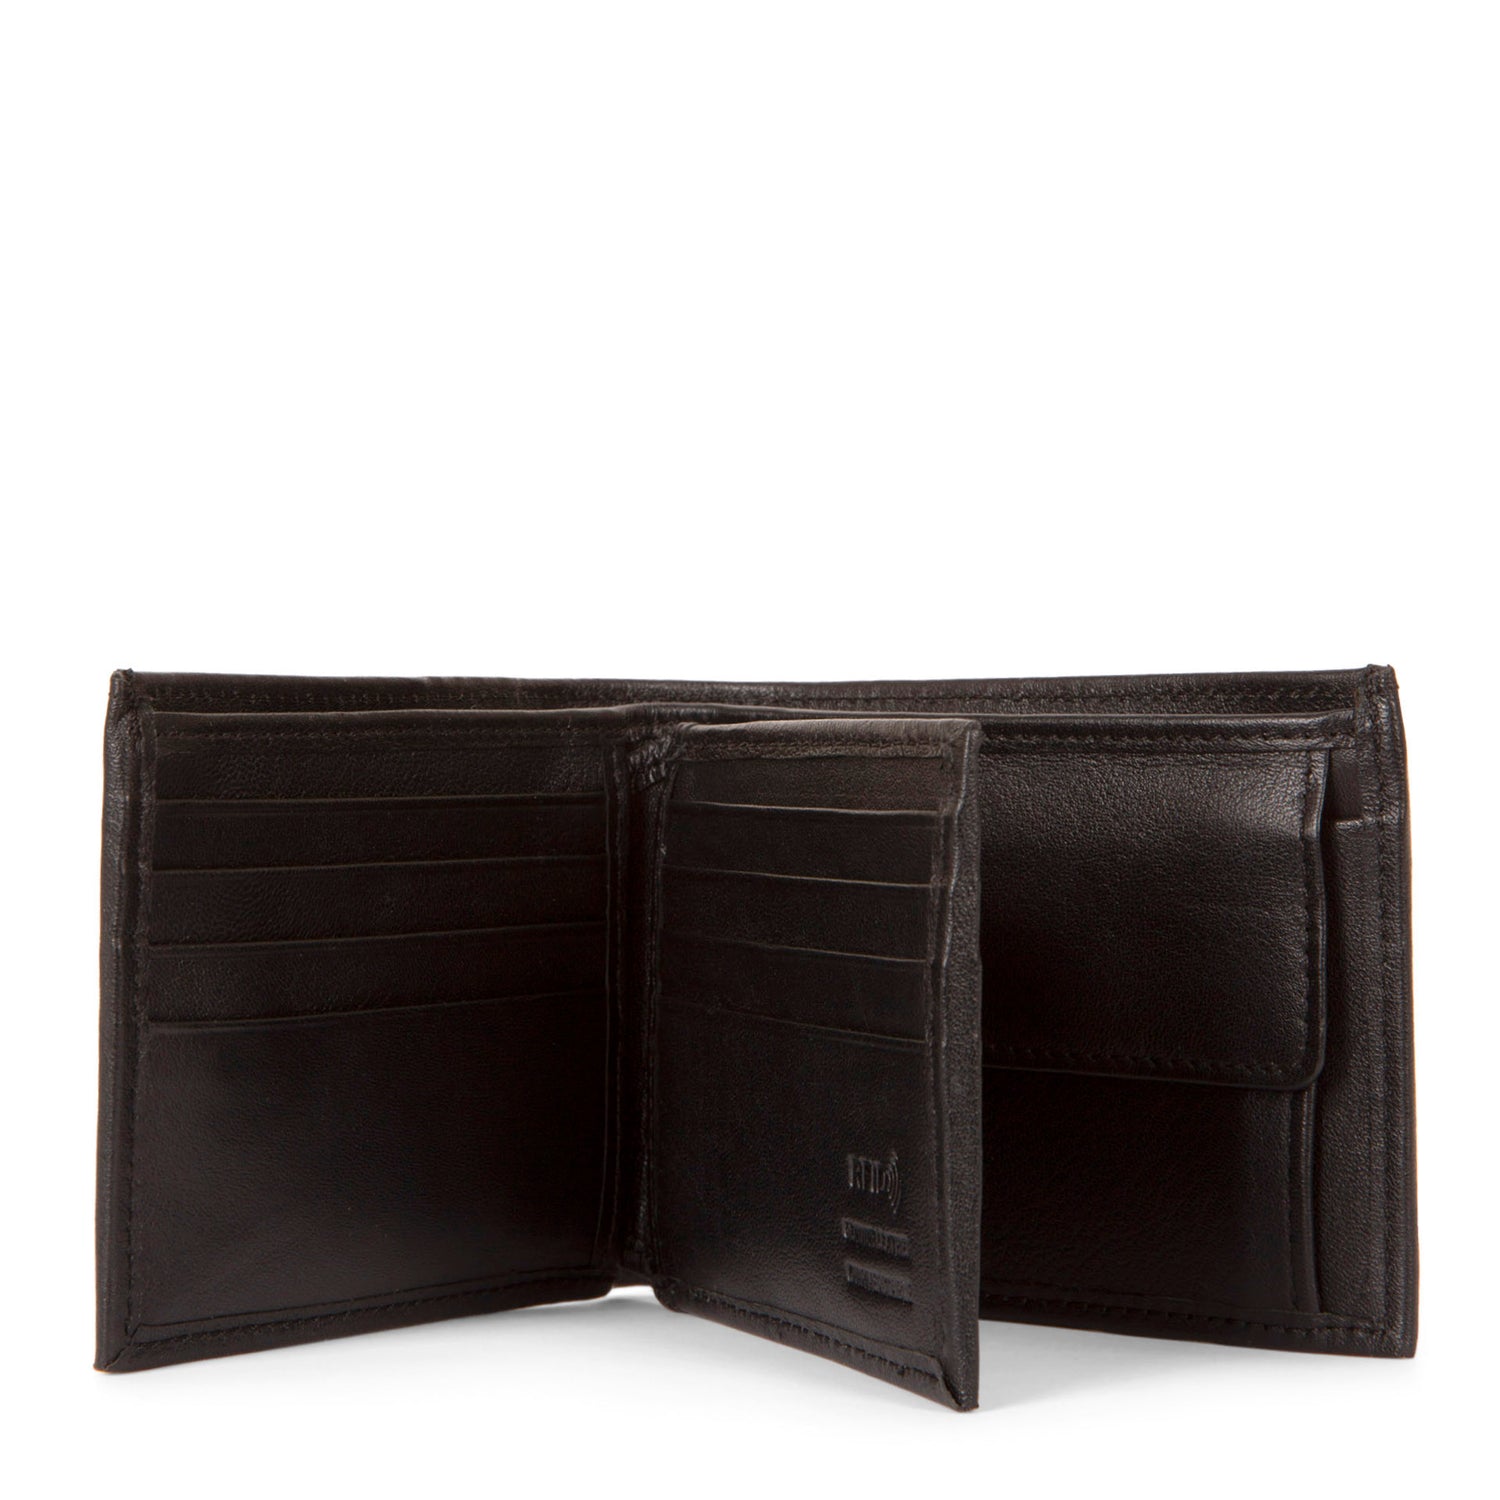 Leather RFID Bi-Fold Centre Wing with coin Pocket Wallet - Black